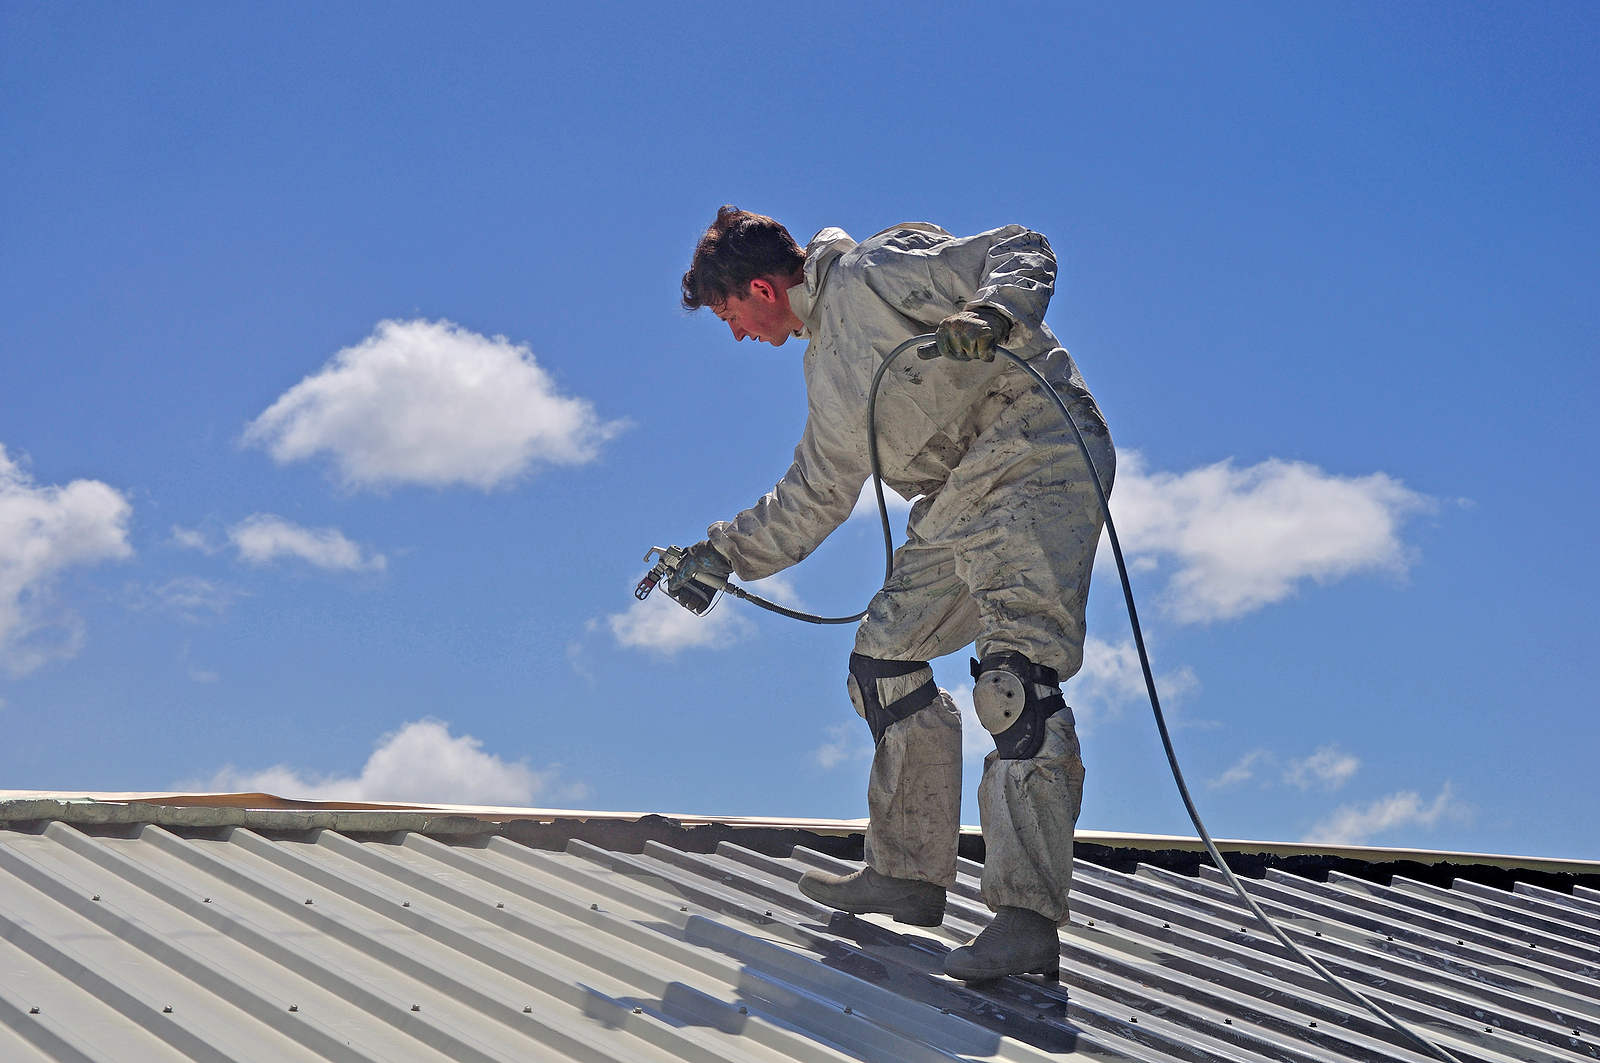 Acrylic roof painting - First Quality Roofing in Las Vegas, Nevada